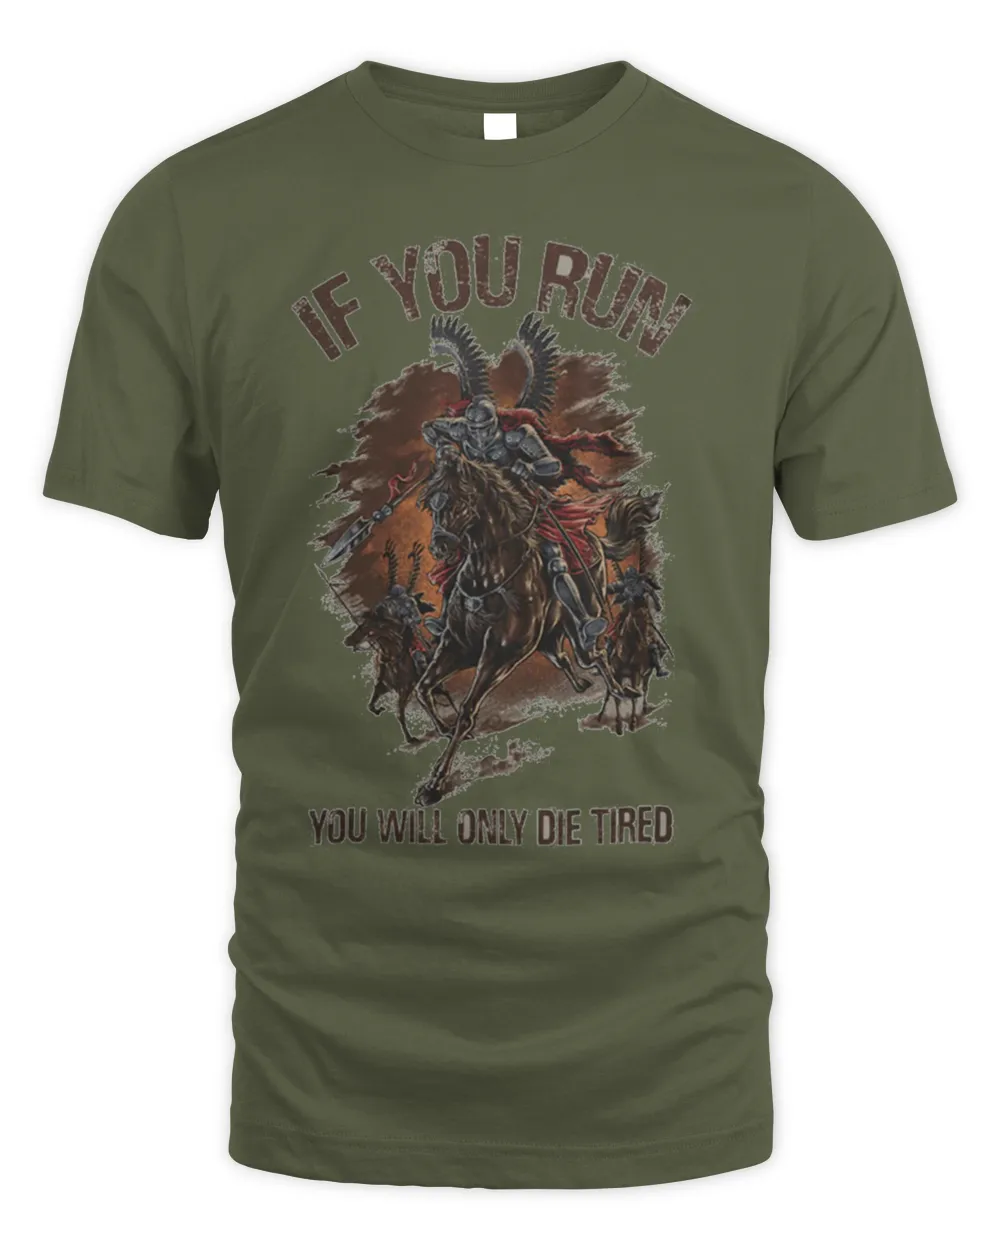 If you run, you will only die tired Shirt